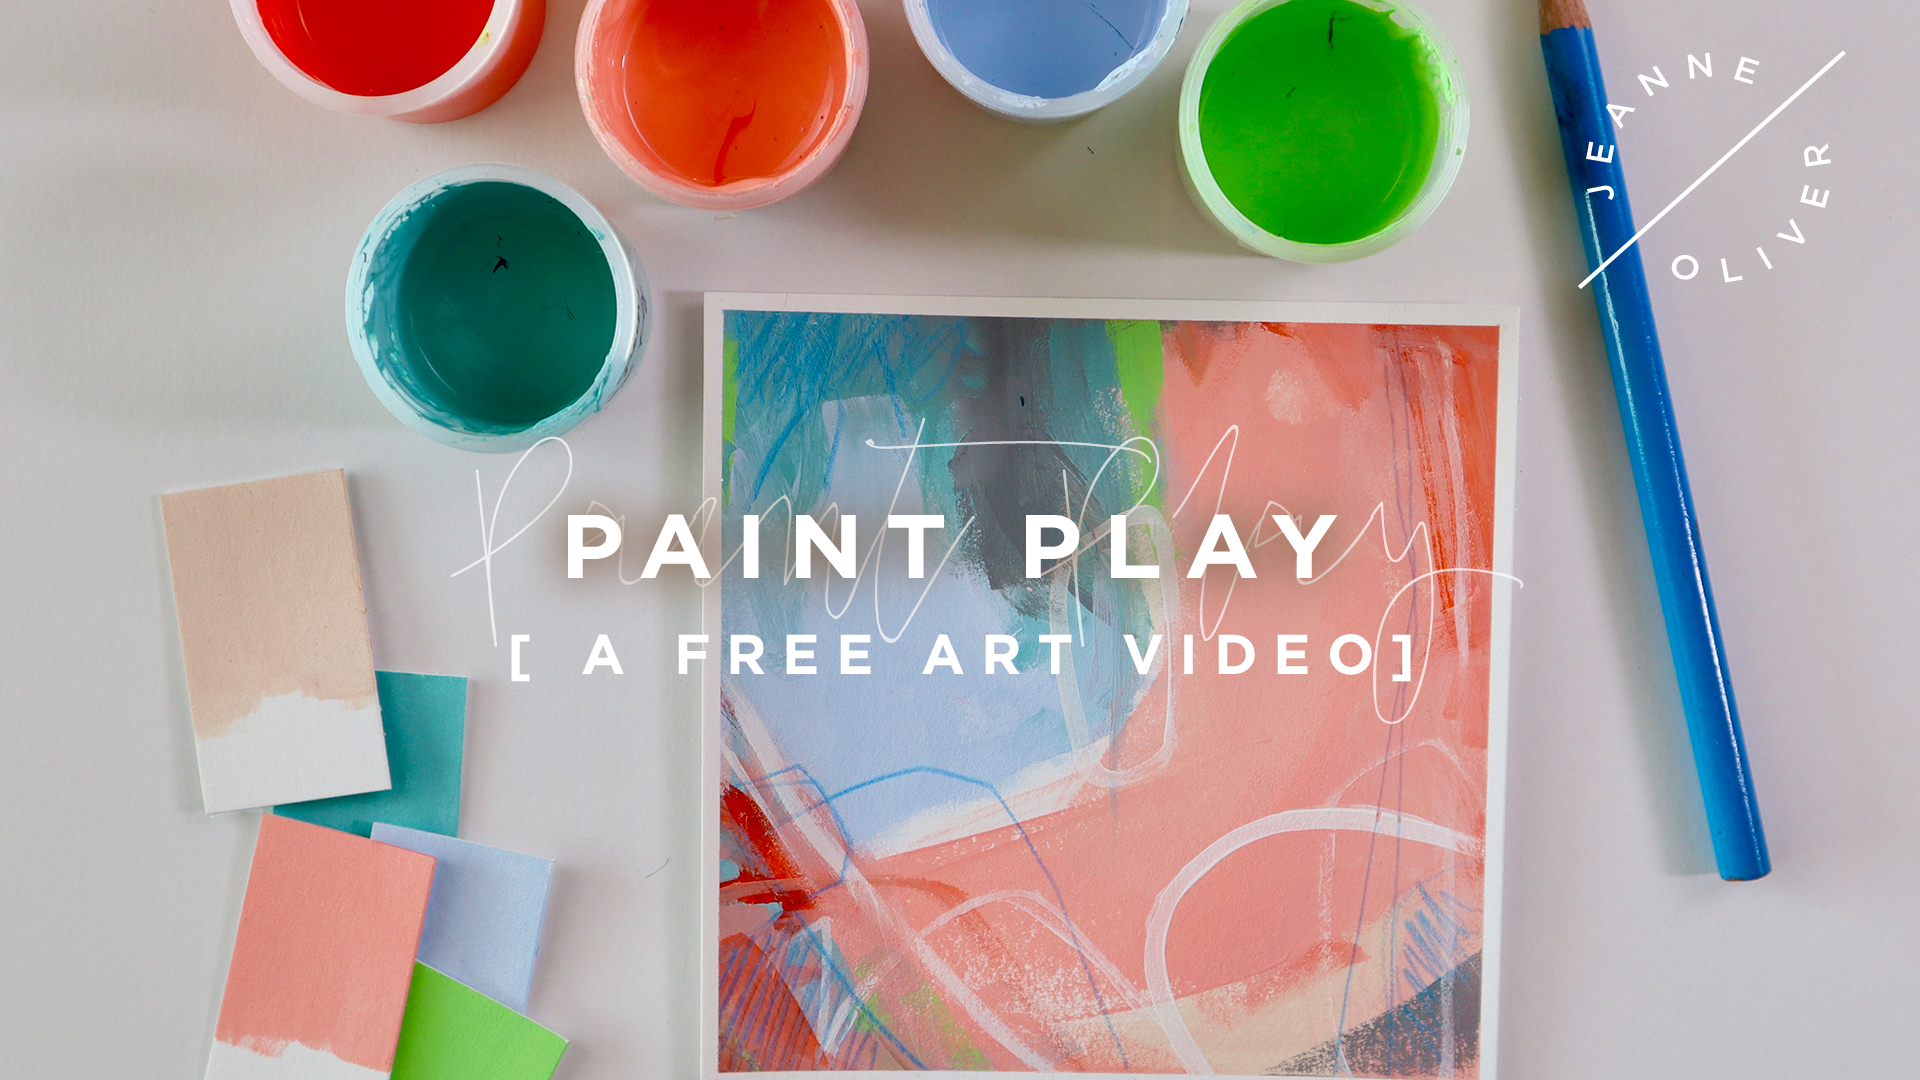 New Free Art Video | Paint Play with Carolina Della Valle